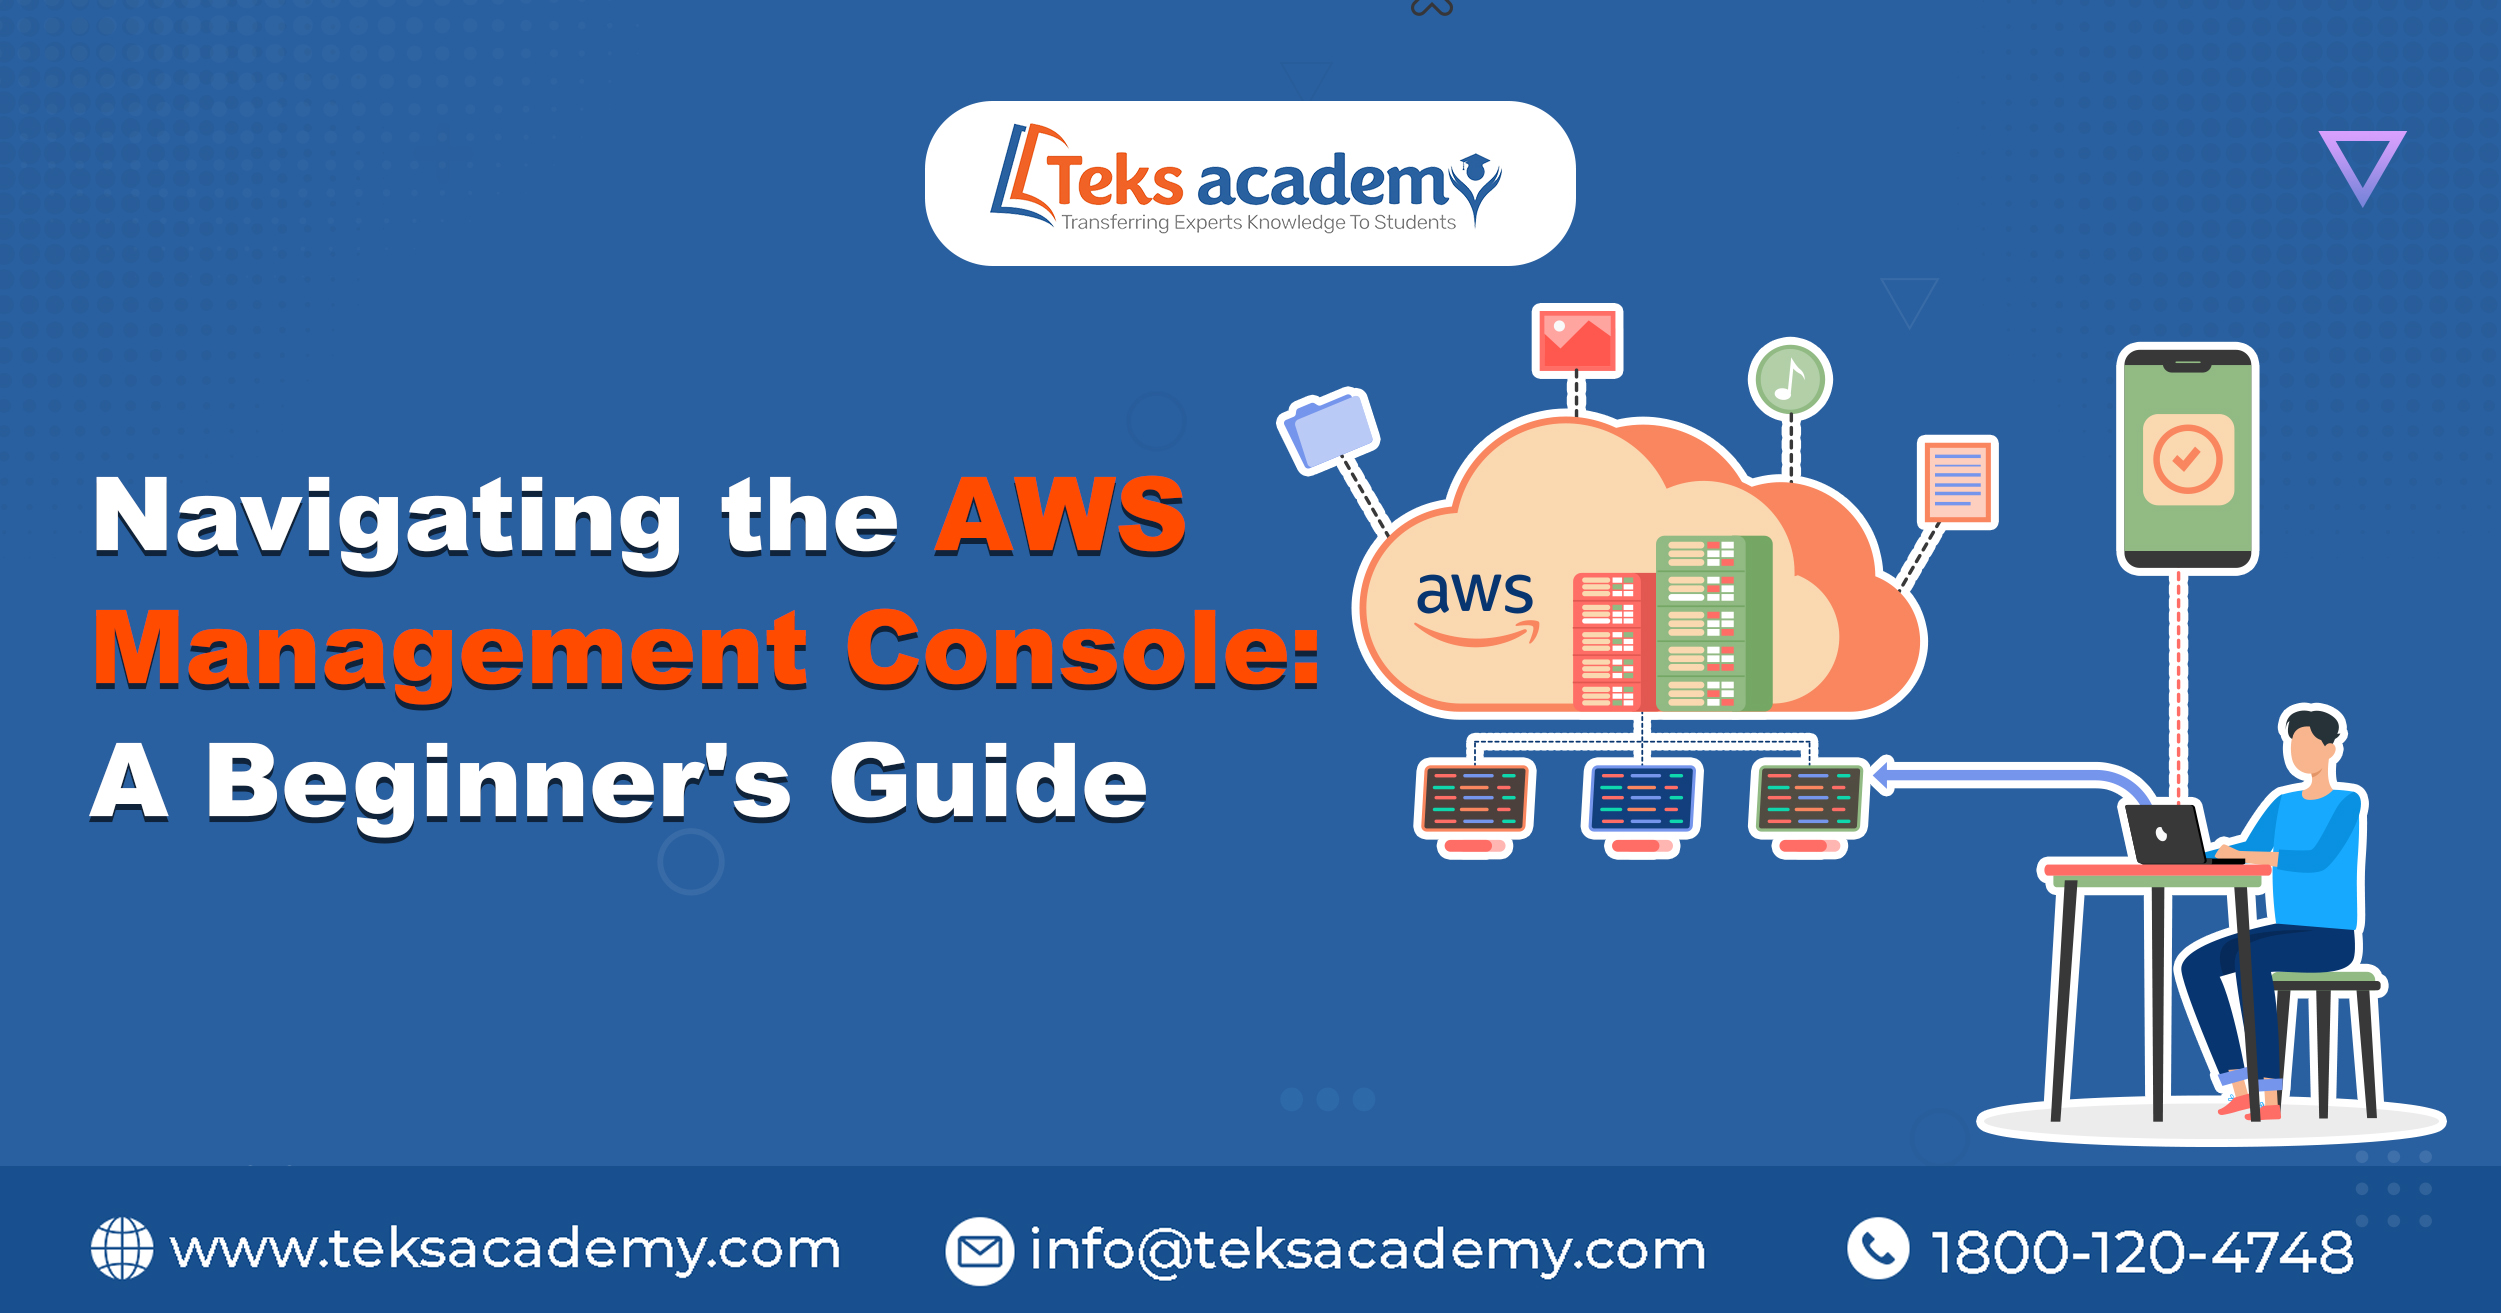 Navigating the AWS Management Console: A Beginner’s Guide